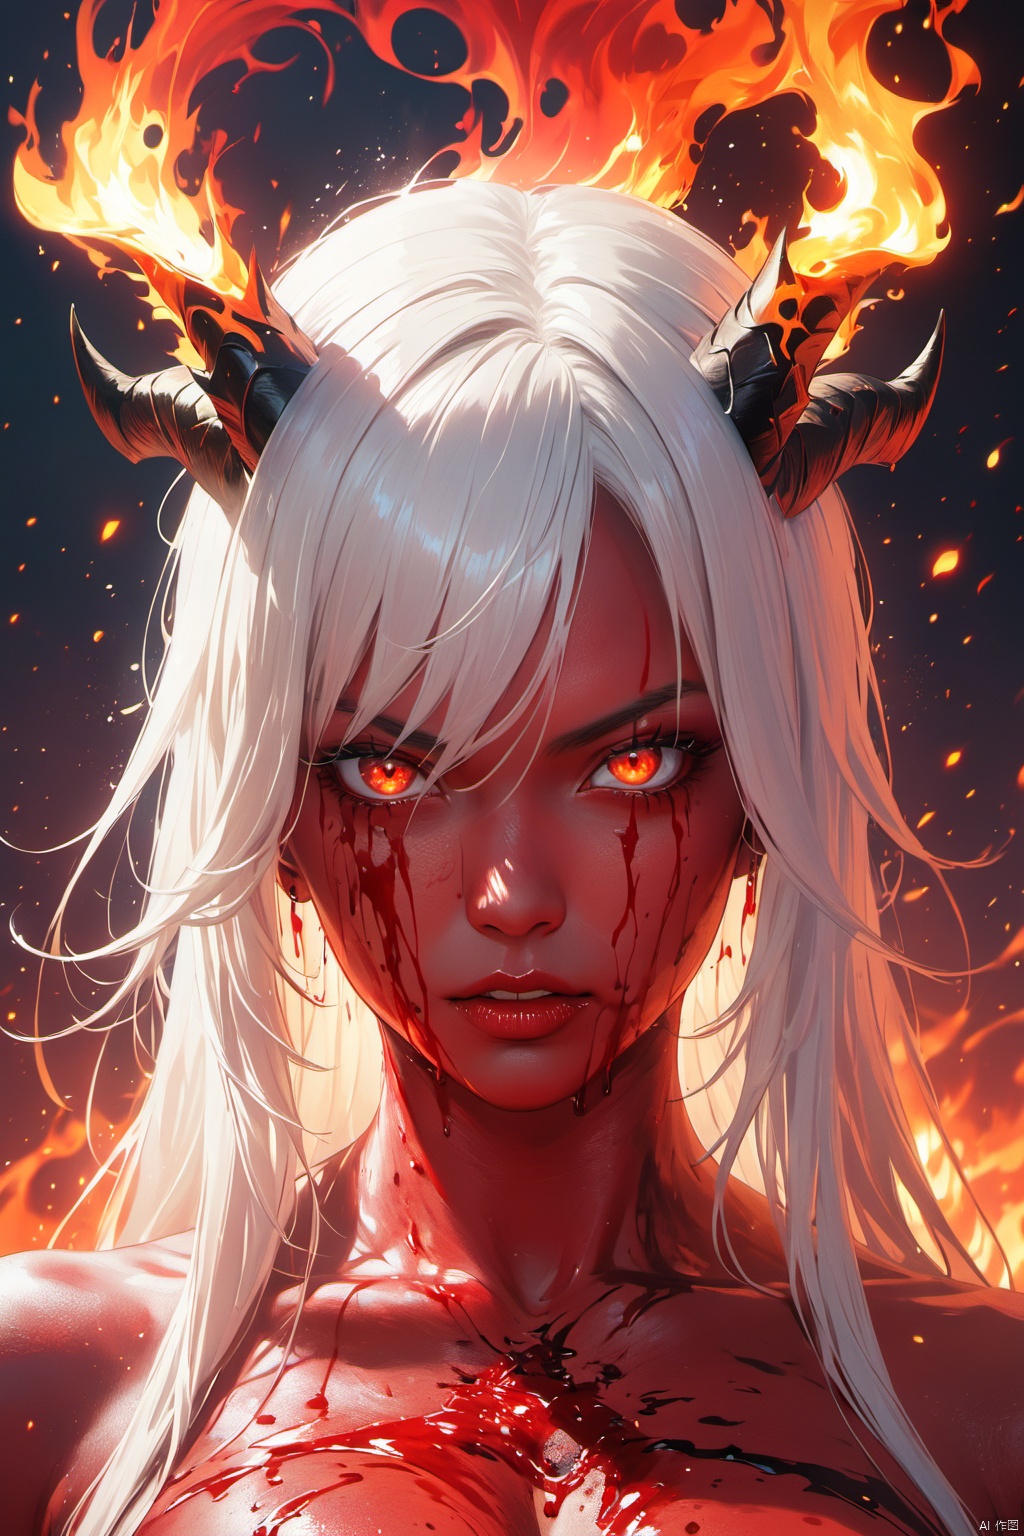 White hair, horns shining with fire,Exquisite and delicate large horns,Lower your head and look at the camera,Demon king, red skin,black flame,Black fire ignited on the body,kingly demeanor,Bloodthirsty eyes, vicious eyes,ID photo,strong, ferocious,  splashing blood, best quality,Amazing,finely detail,Depth of field,extremely detailed CG unity 8k wallpaper,masterpiece,cosmic eyes,Shock sensation, (realistic :0.5),hybrid